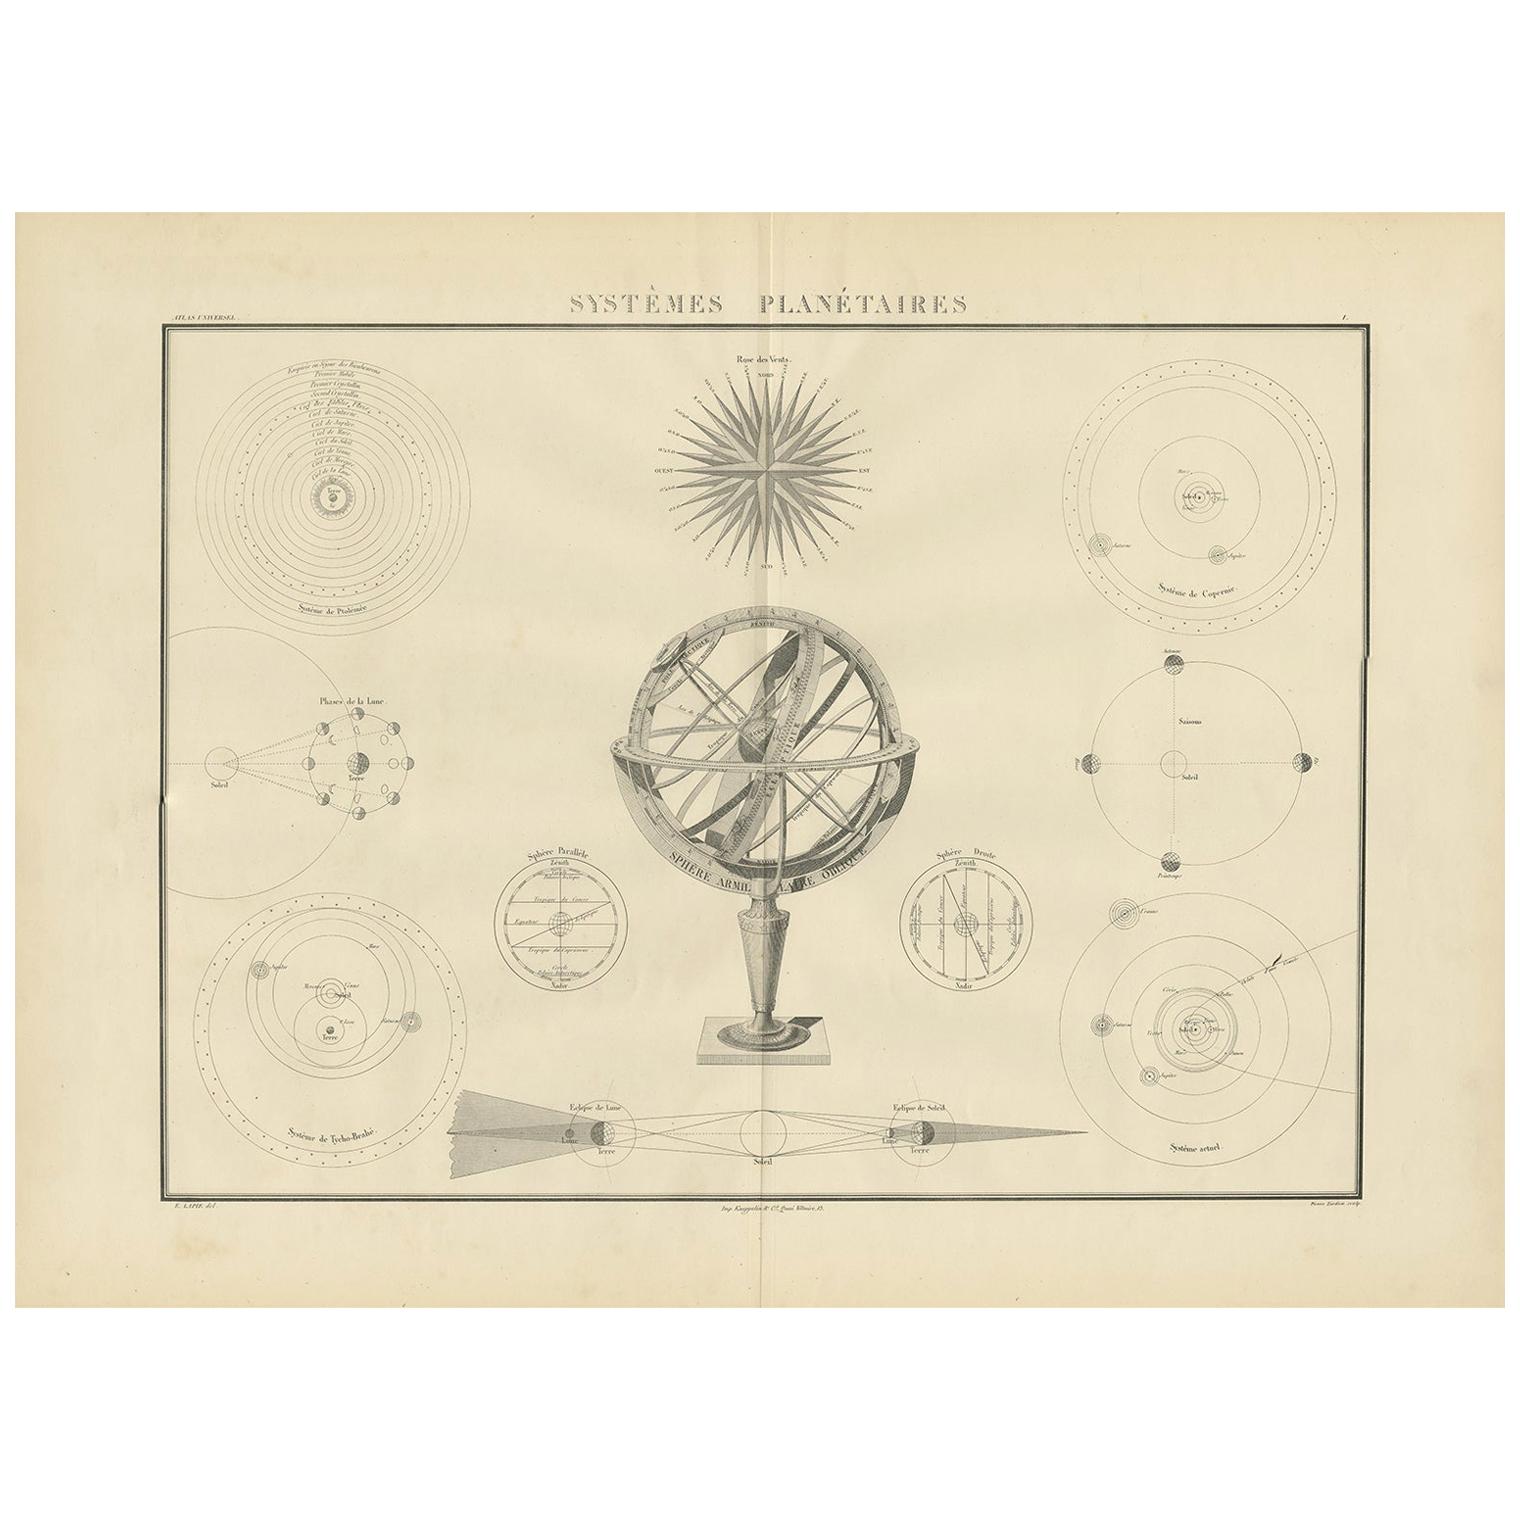 Antique Chart of Celestial and Scientific Models by Lapie, 1842